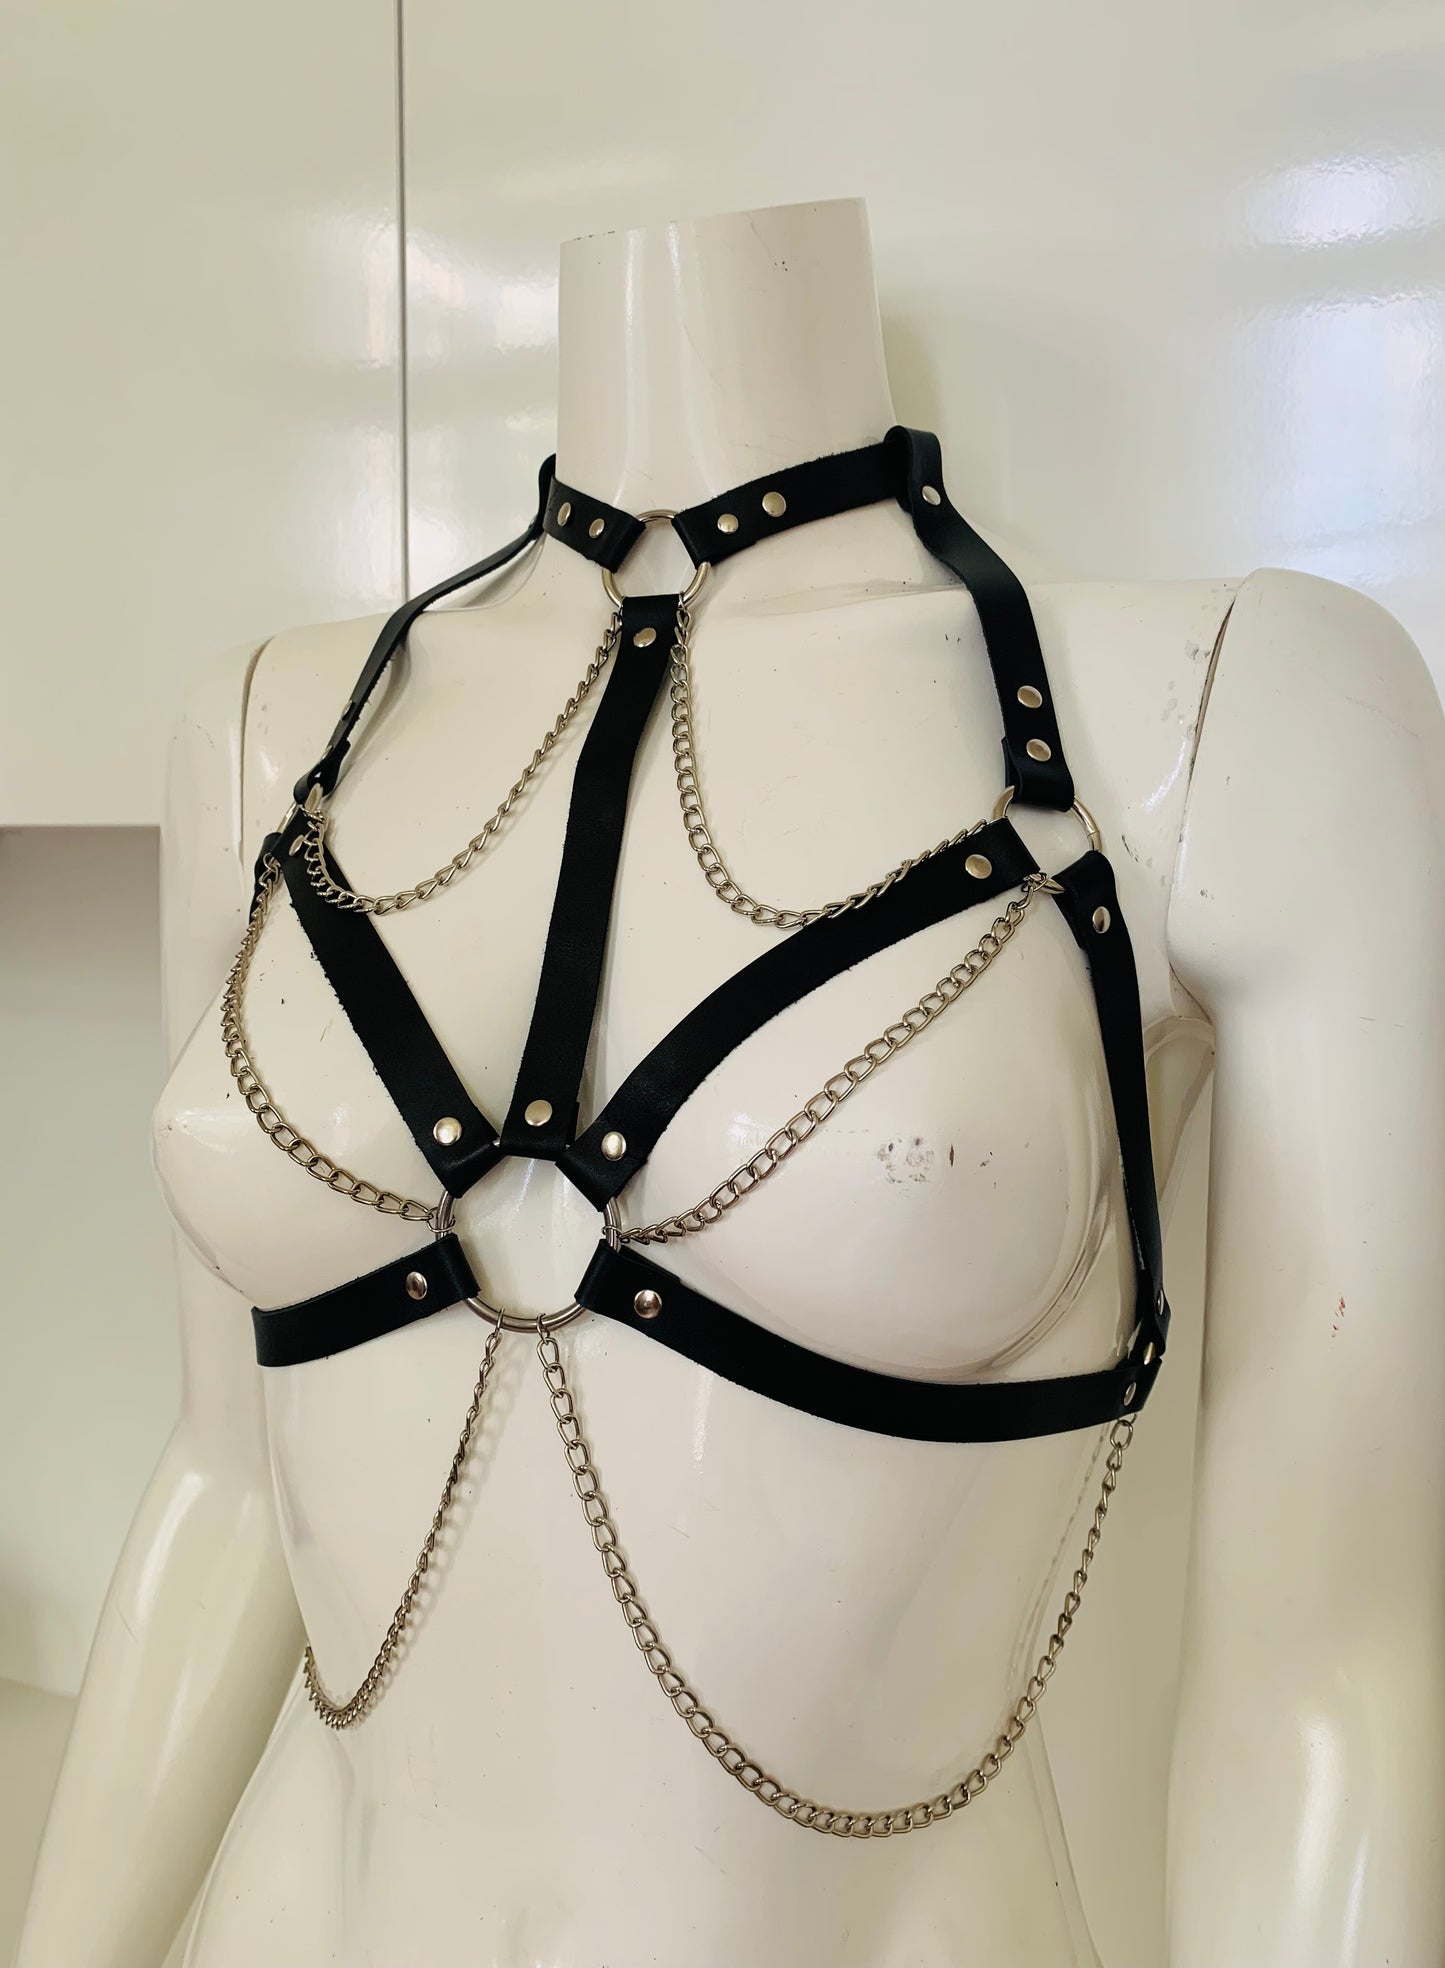 Die Welle Leather Harness